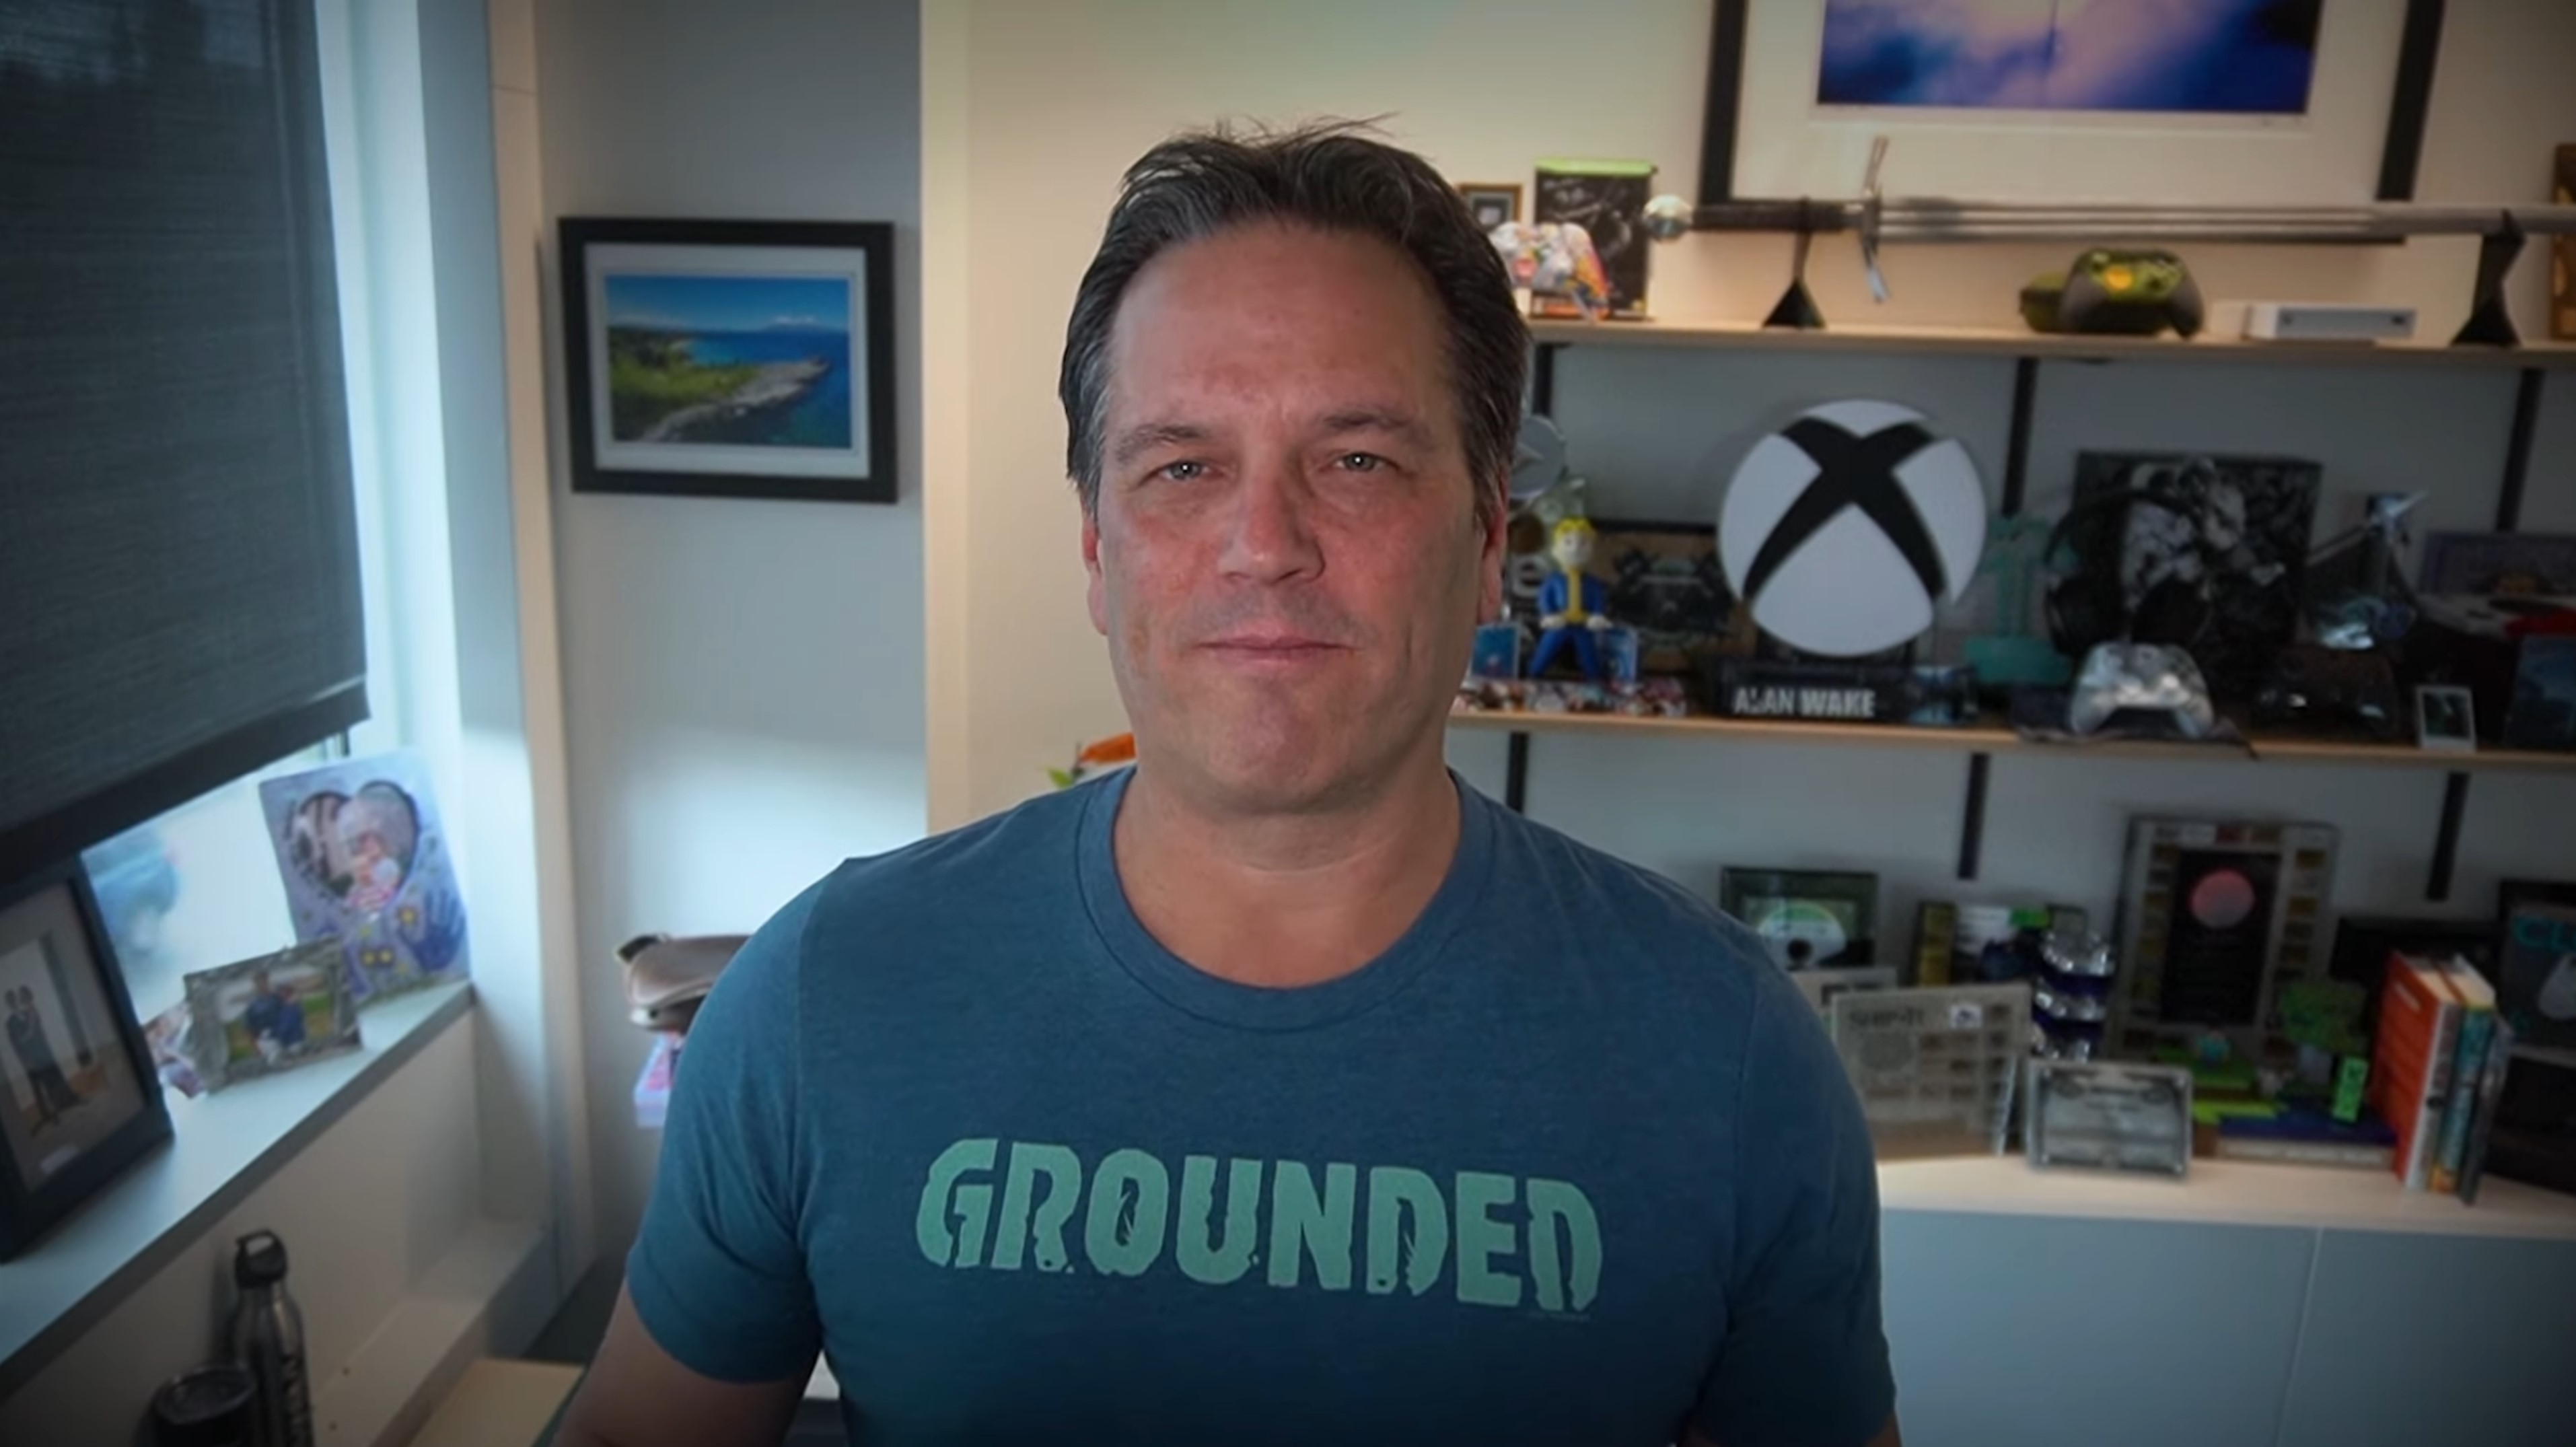 Phil Spencer says Microsoft bought Bethesda to prevent Starfield